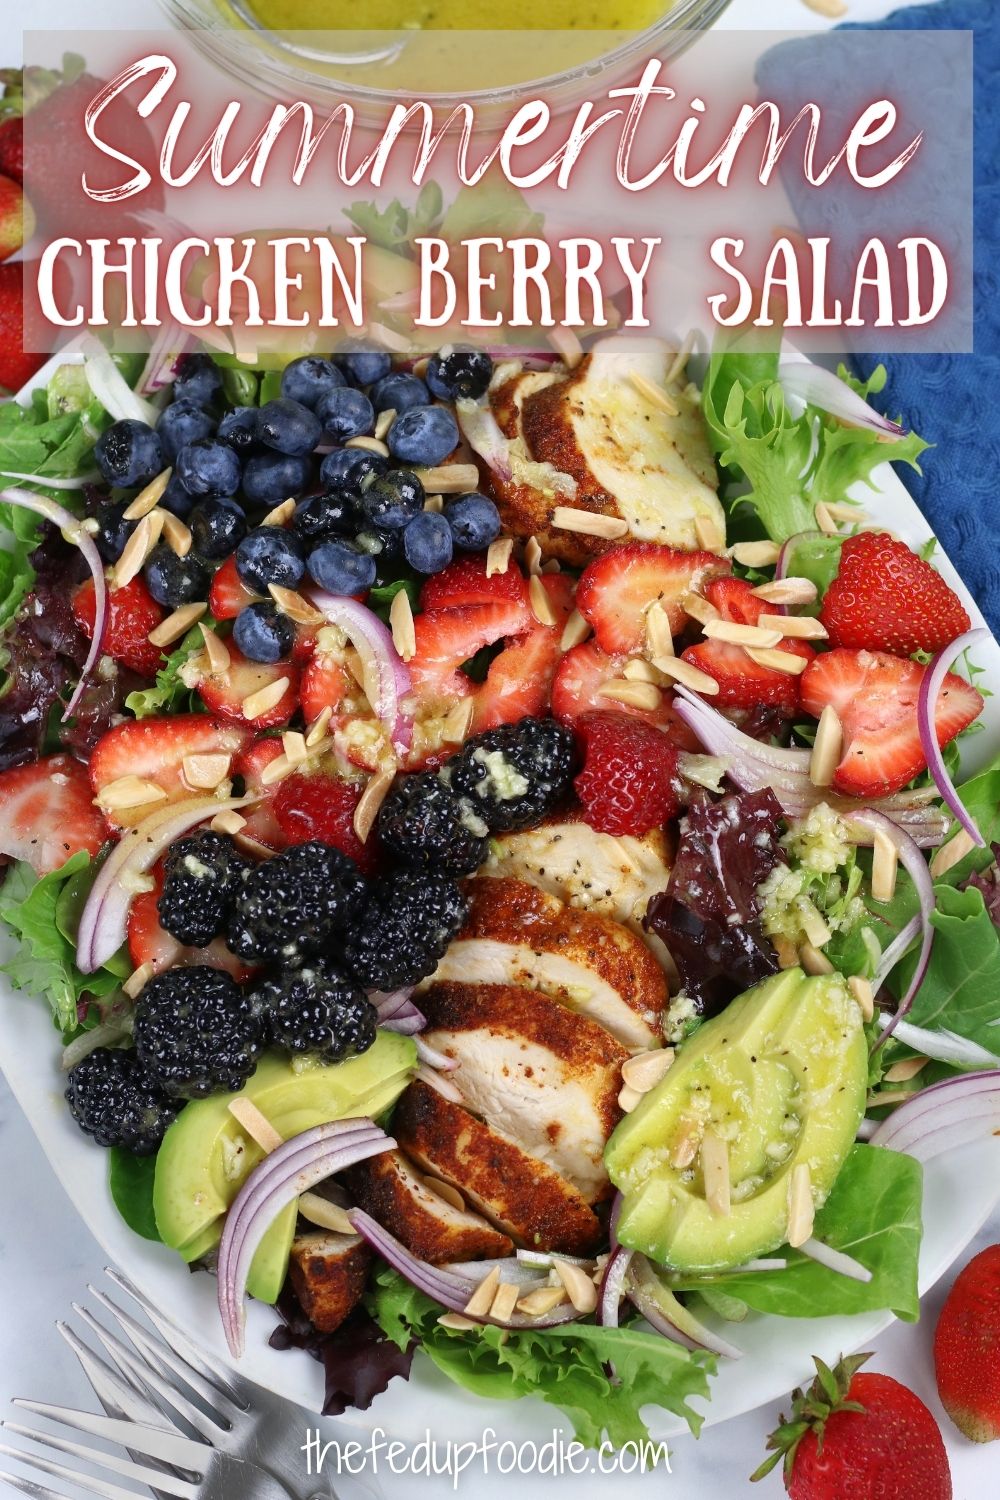 This Chicken Berry Salad is sweet, savory and refreshing. Made with All-Purpose Chicken Breasts, three different kind of berries, avocado and a homemade White Balsamic Vinaigrette. Topped with crunchy toasted almond slivers, this is a divine summer chicken salad. Included also are time saving tips for the easiest of weeknight dinners.
#ChickenBerrySalad #ChickenBerrySaladRecipe #SummerChickenBerrySalad #BalsamicChickenBerrySalad #WhiteBalsamicChickenBerrySalad